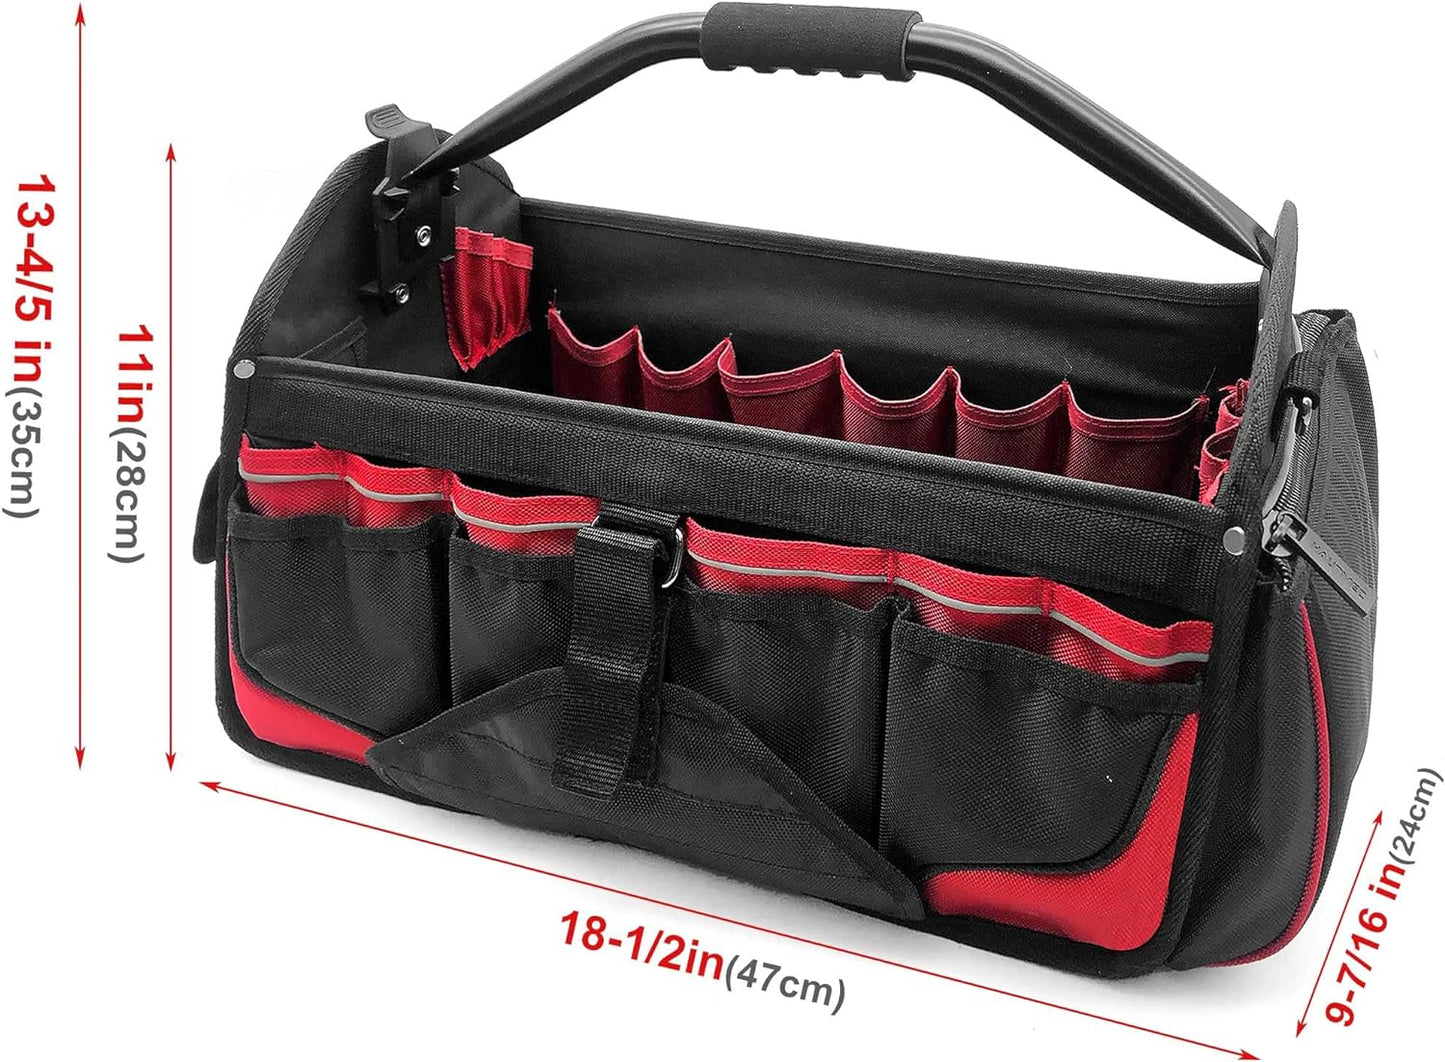 HAUTMEC Open Top Electrician Tool Bag with Rotating Handle, Heavy Duty Multiple 39 1680D Pockets, 18" (47cm) Wide Stiff Frame Tote Bag, Electrical and Maintenance Tote Tool Box HT0178-TB